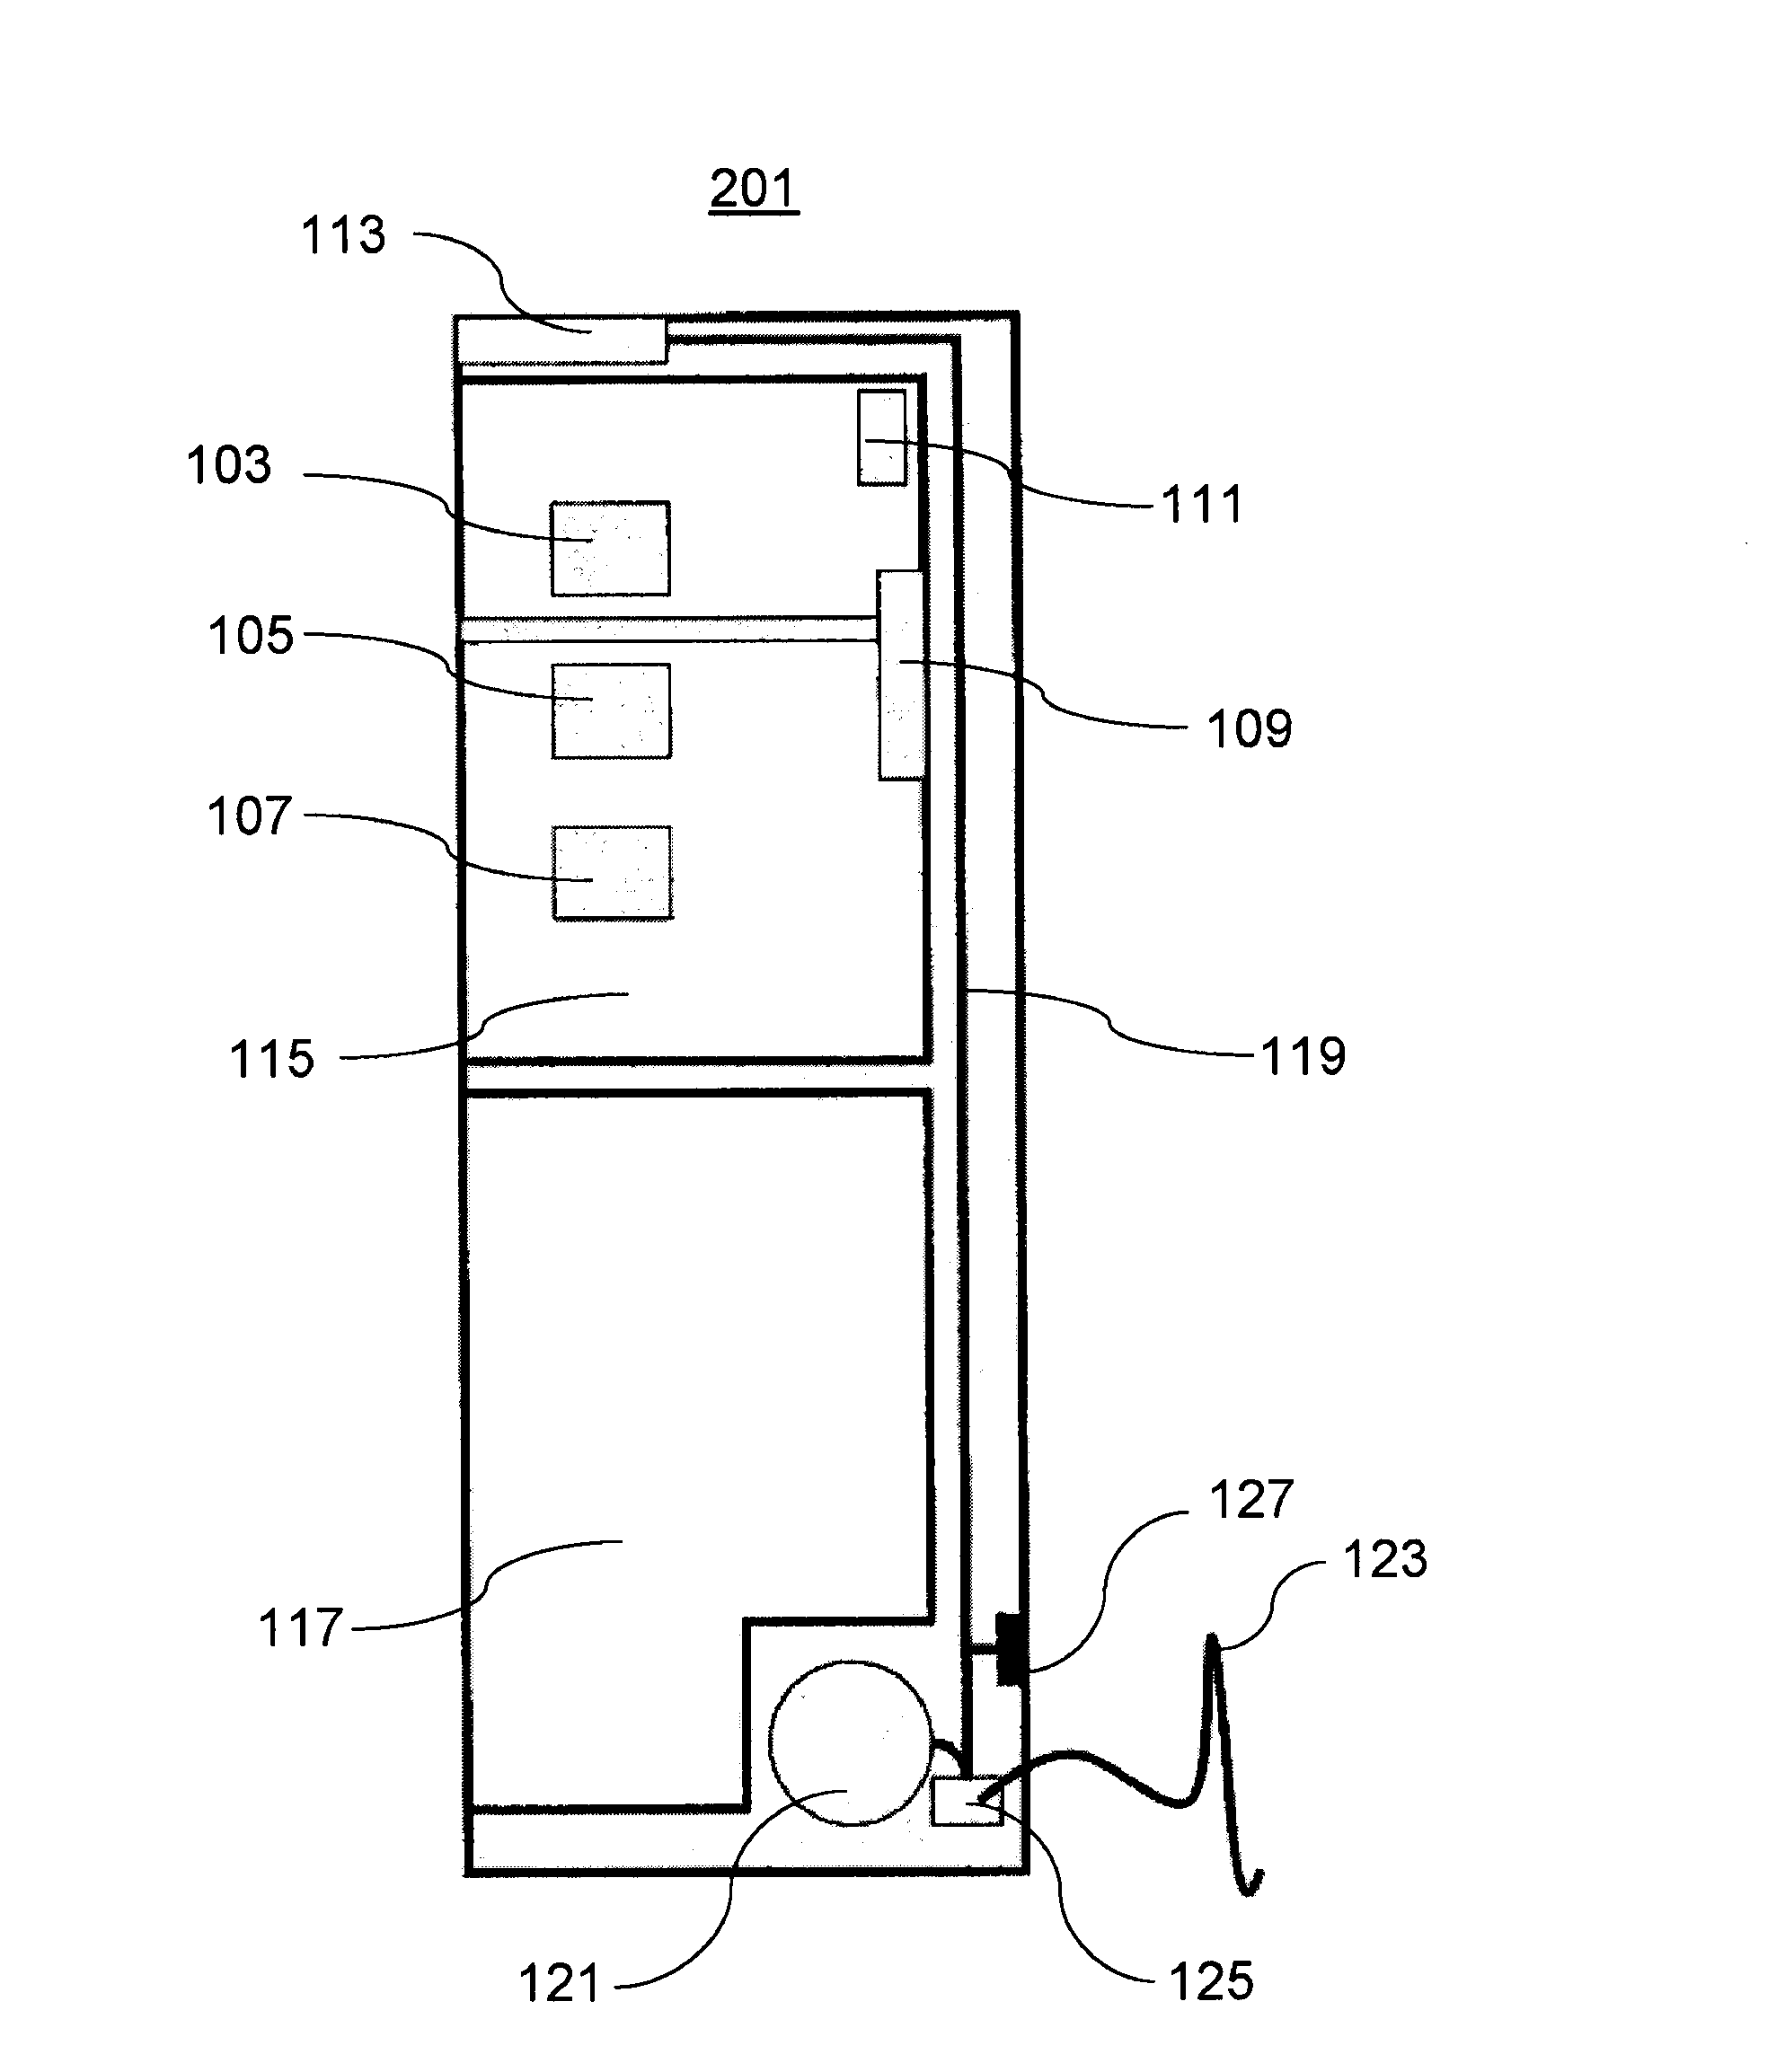 Domestic appliance transmitting electric power to electric equipment unit in directed wireless mode